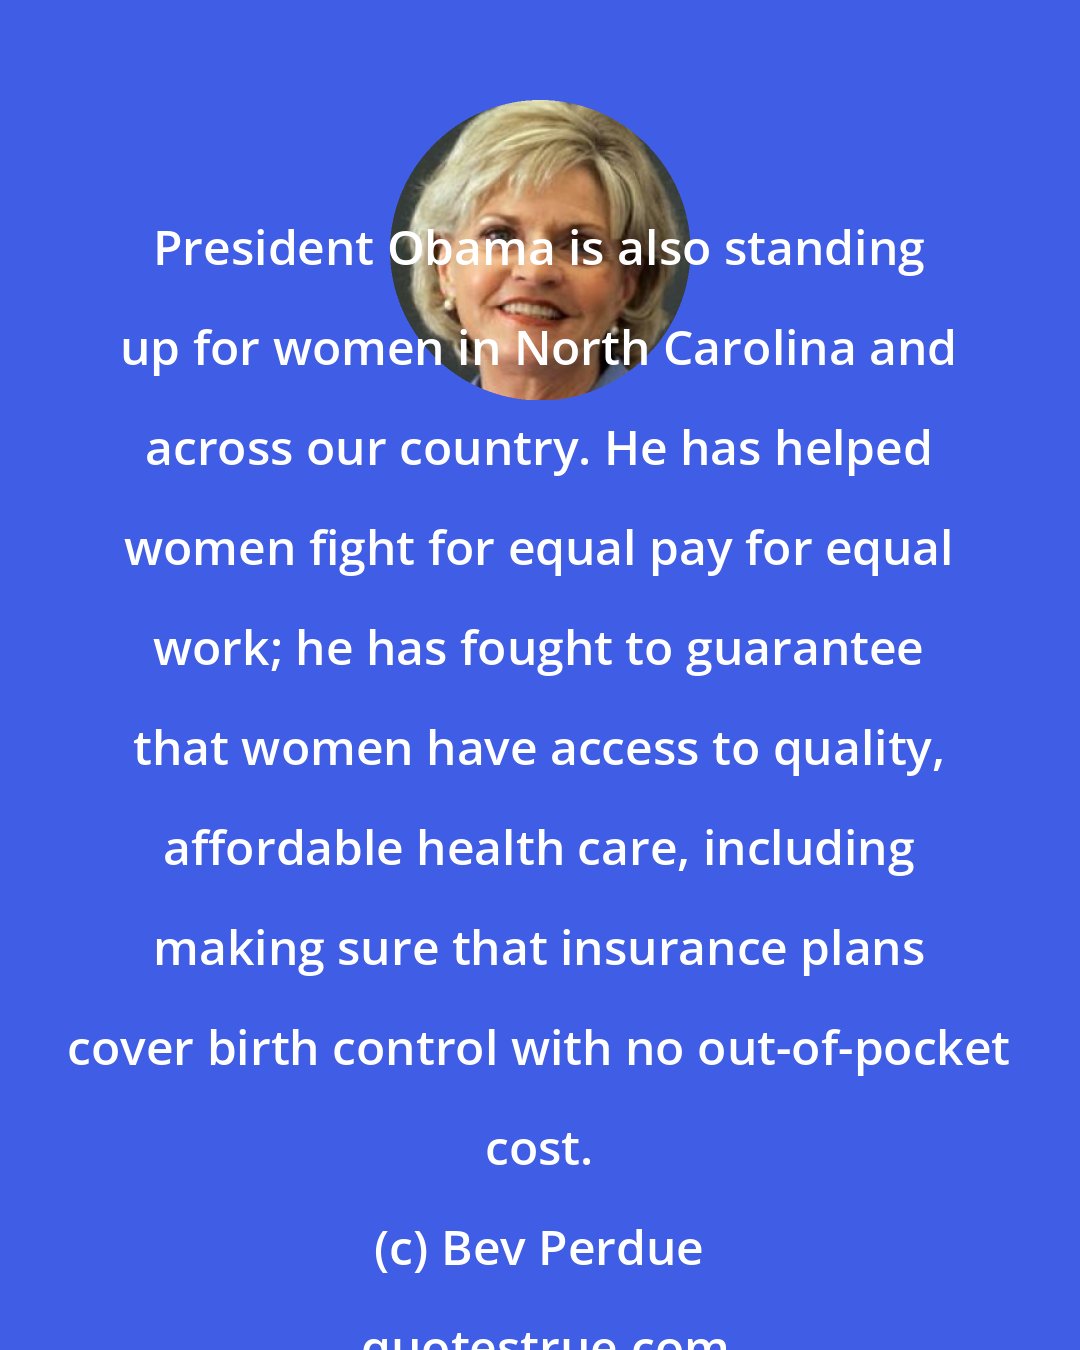 Bev Perdue: President Obama is also standing up for women in North Carolina and across our country. He has helped women fight for equal pay for equal work; he has fought to guarantee that women have access to quality, affordable health care, including making sure that insurance plans cover birth control with no out-of-pocket cost.